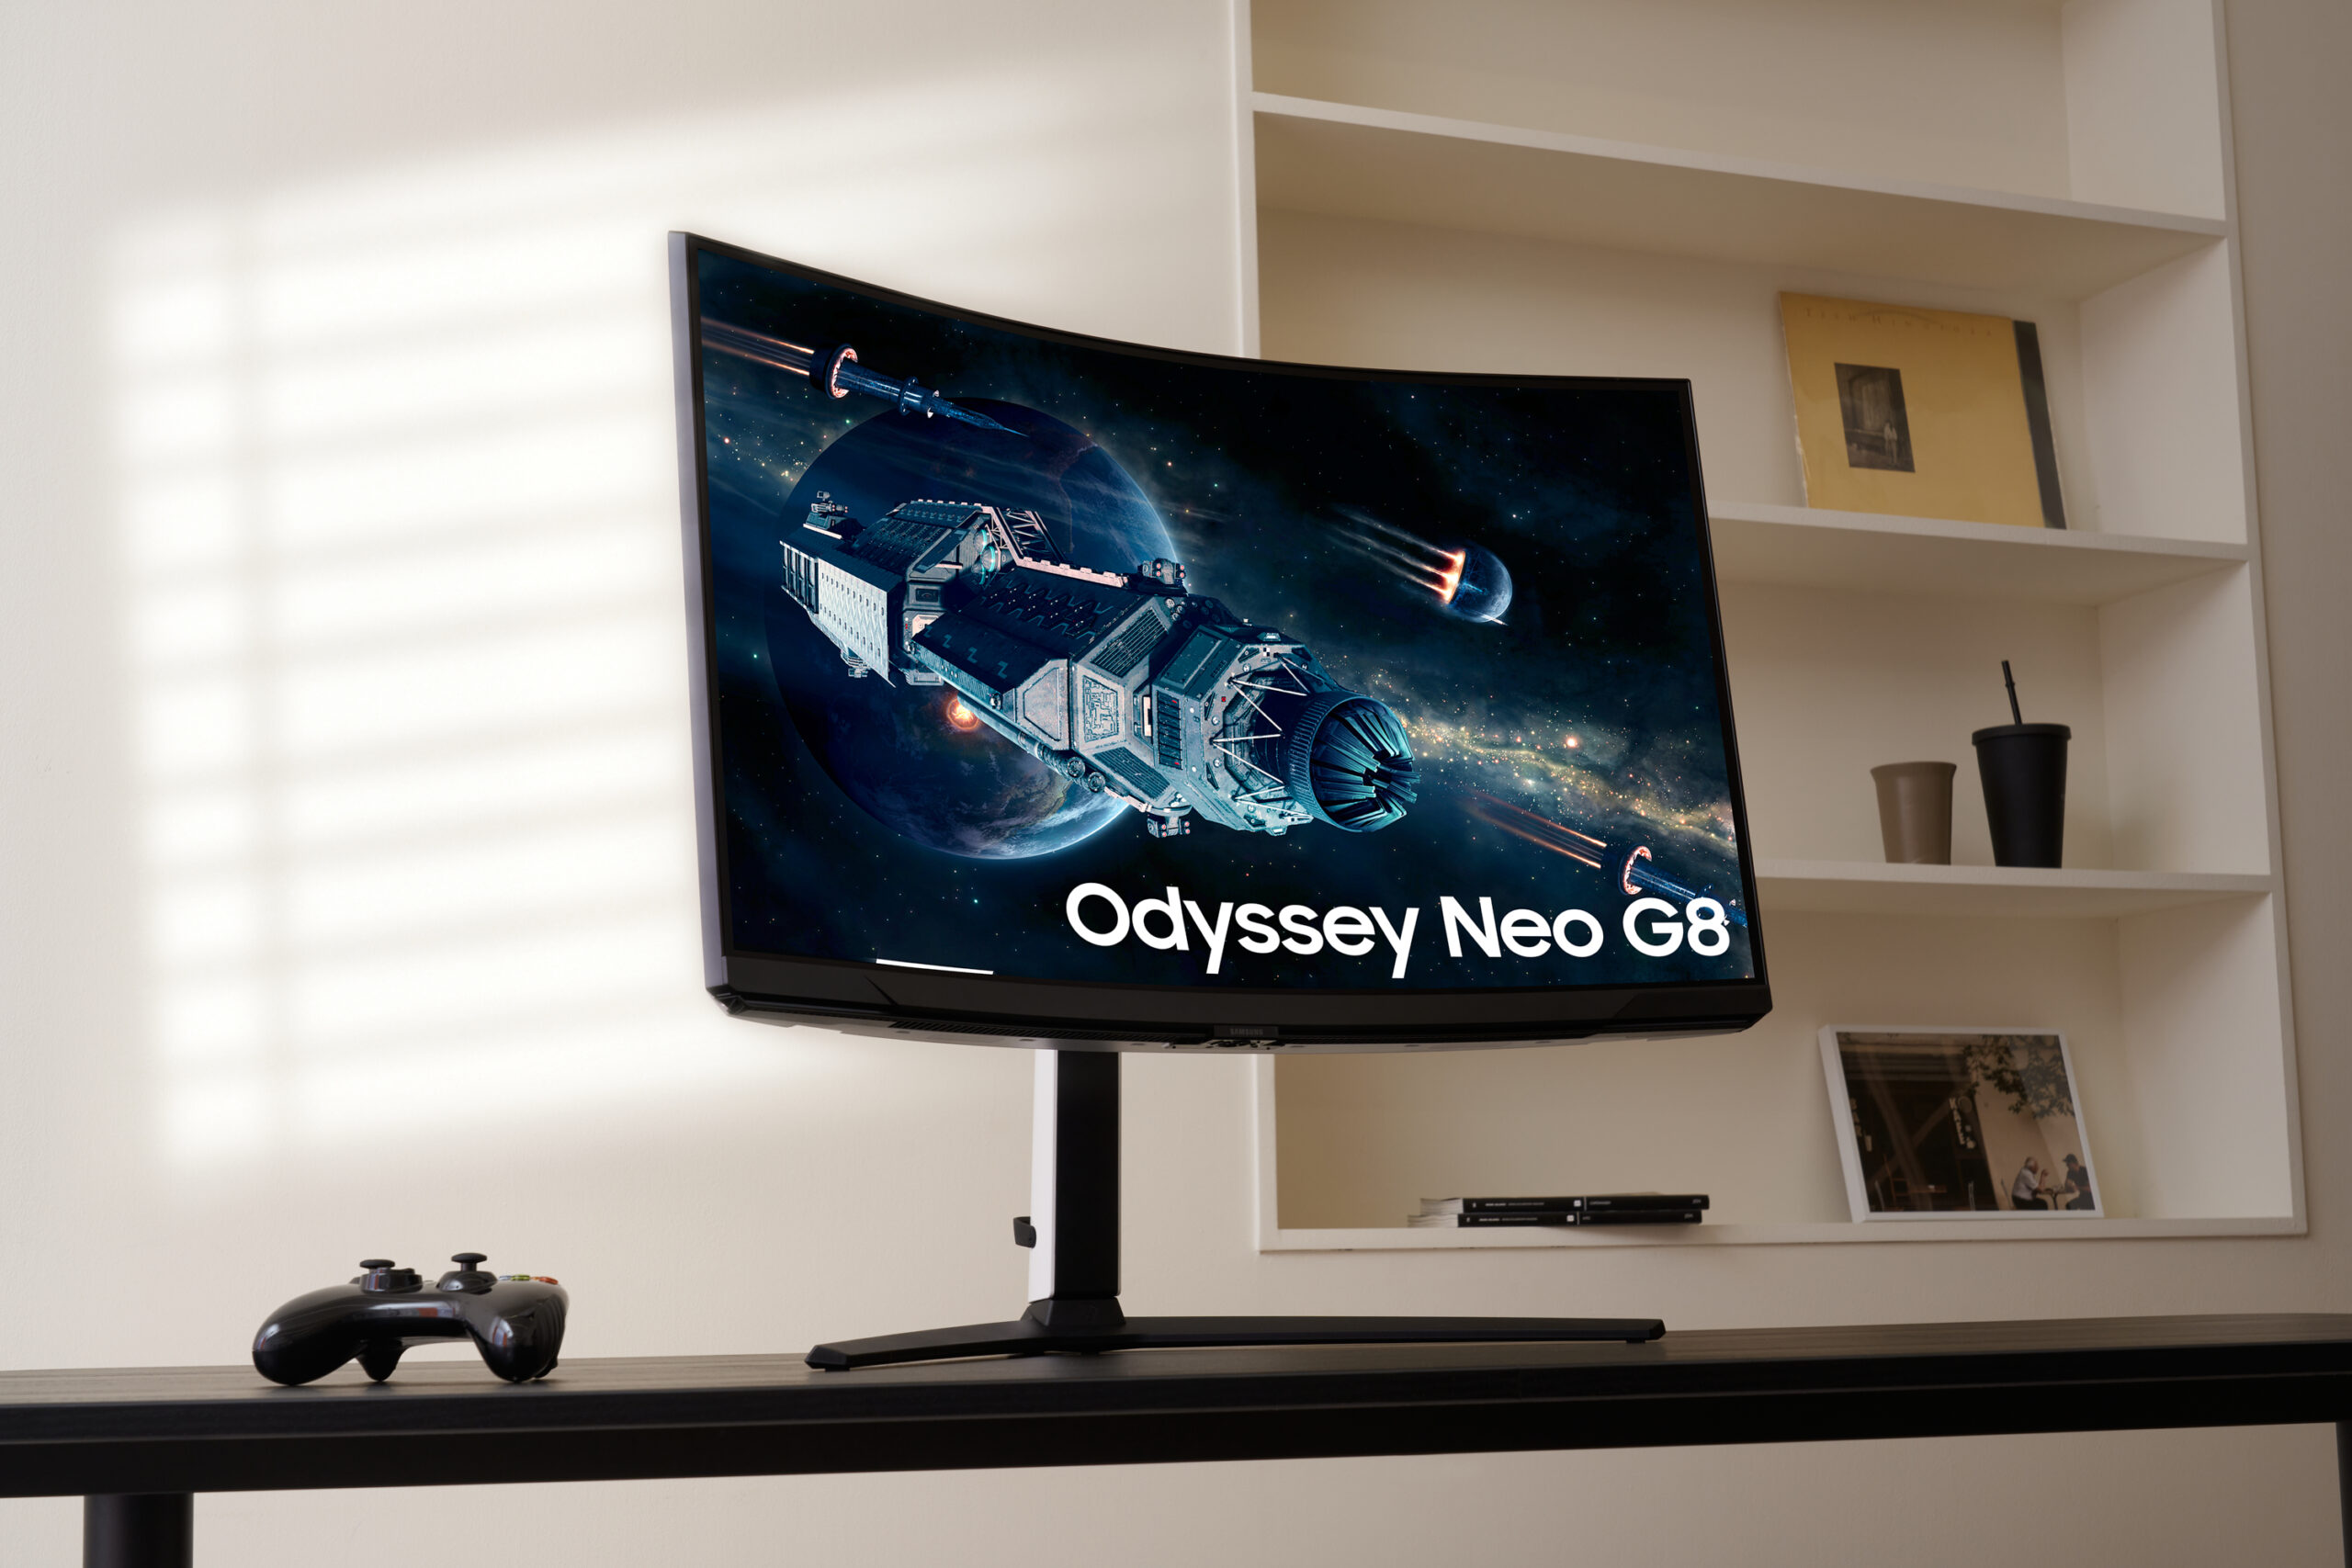 Samsung Unveils Its Expanded 2021 Odyssey Gaming Monitor Lineup